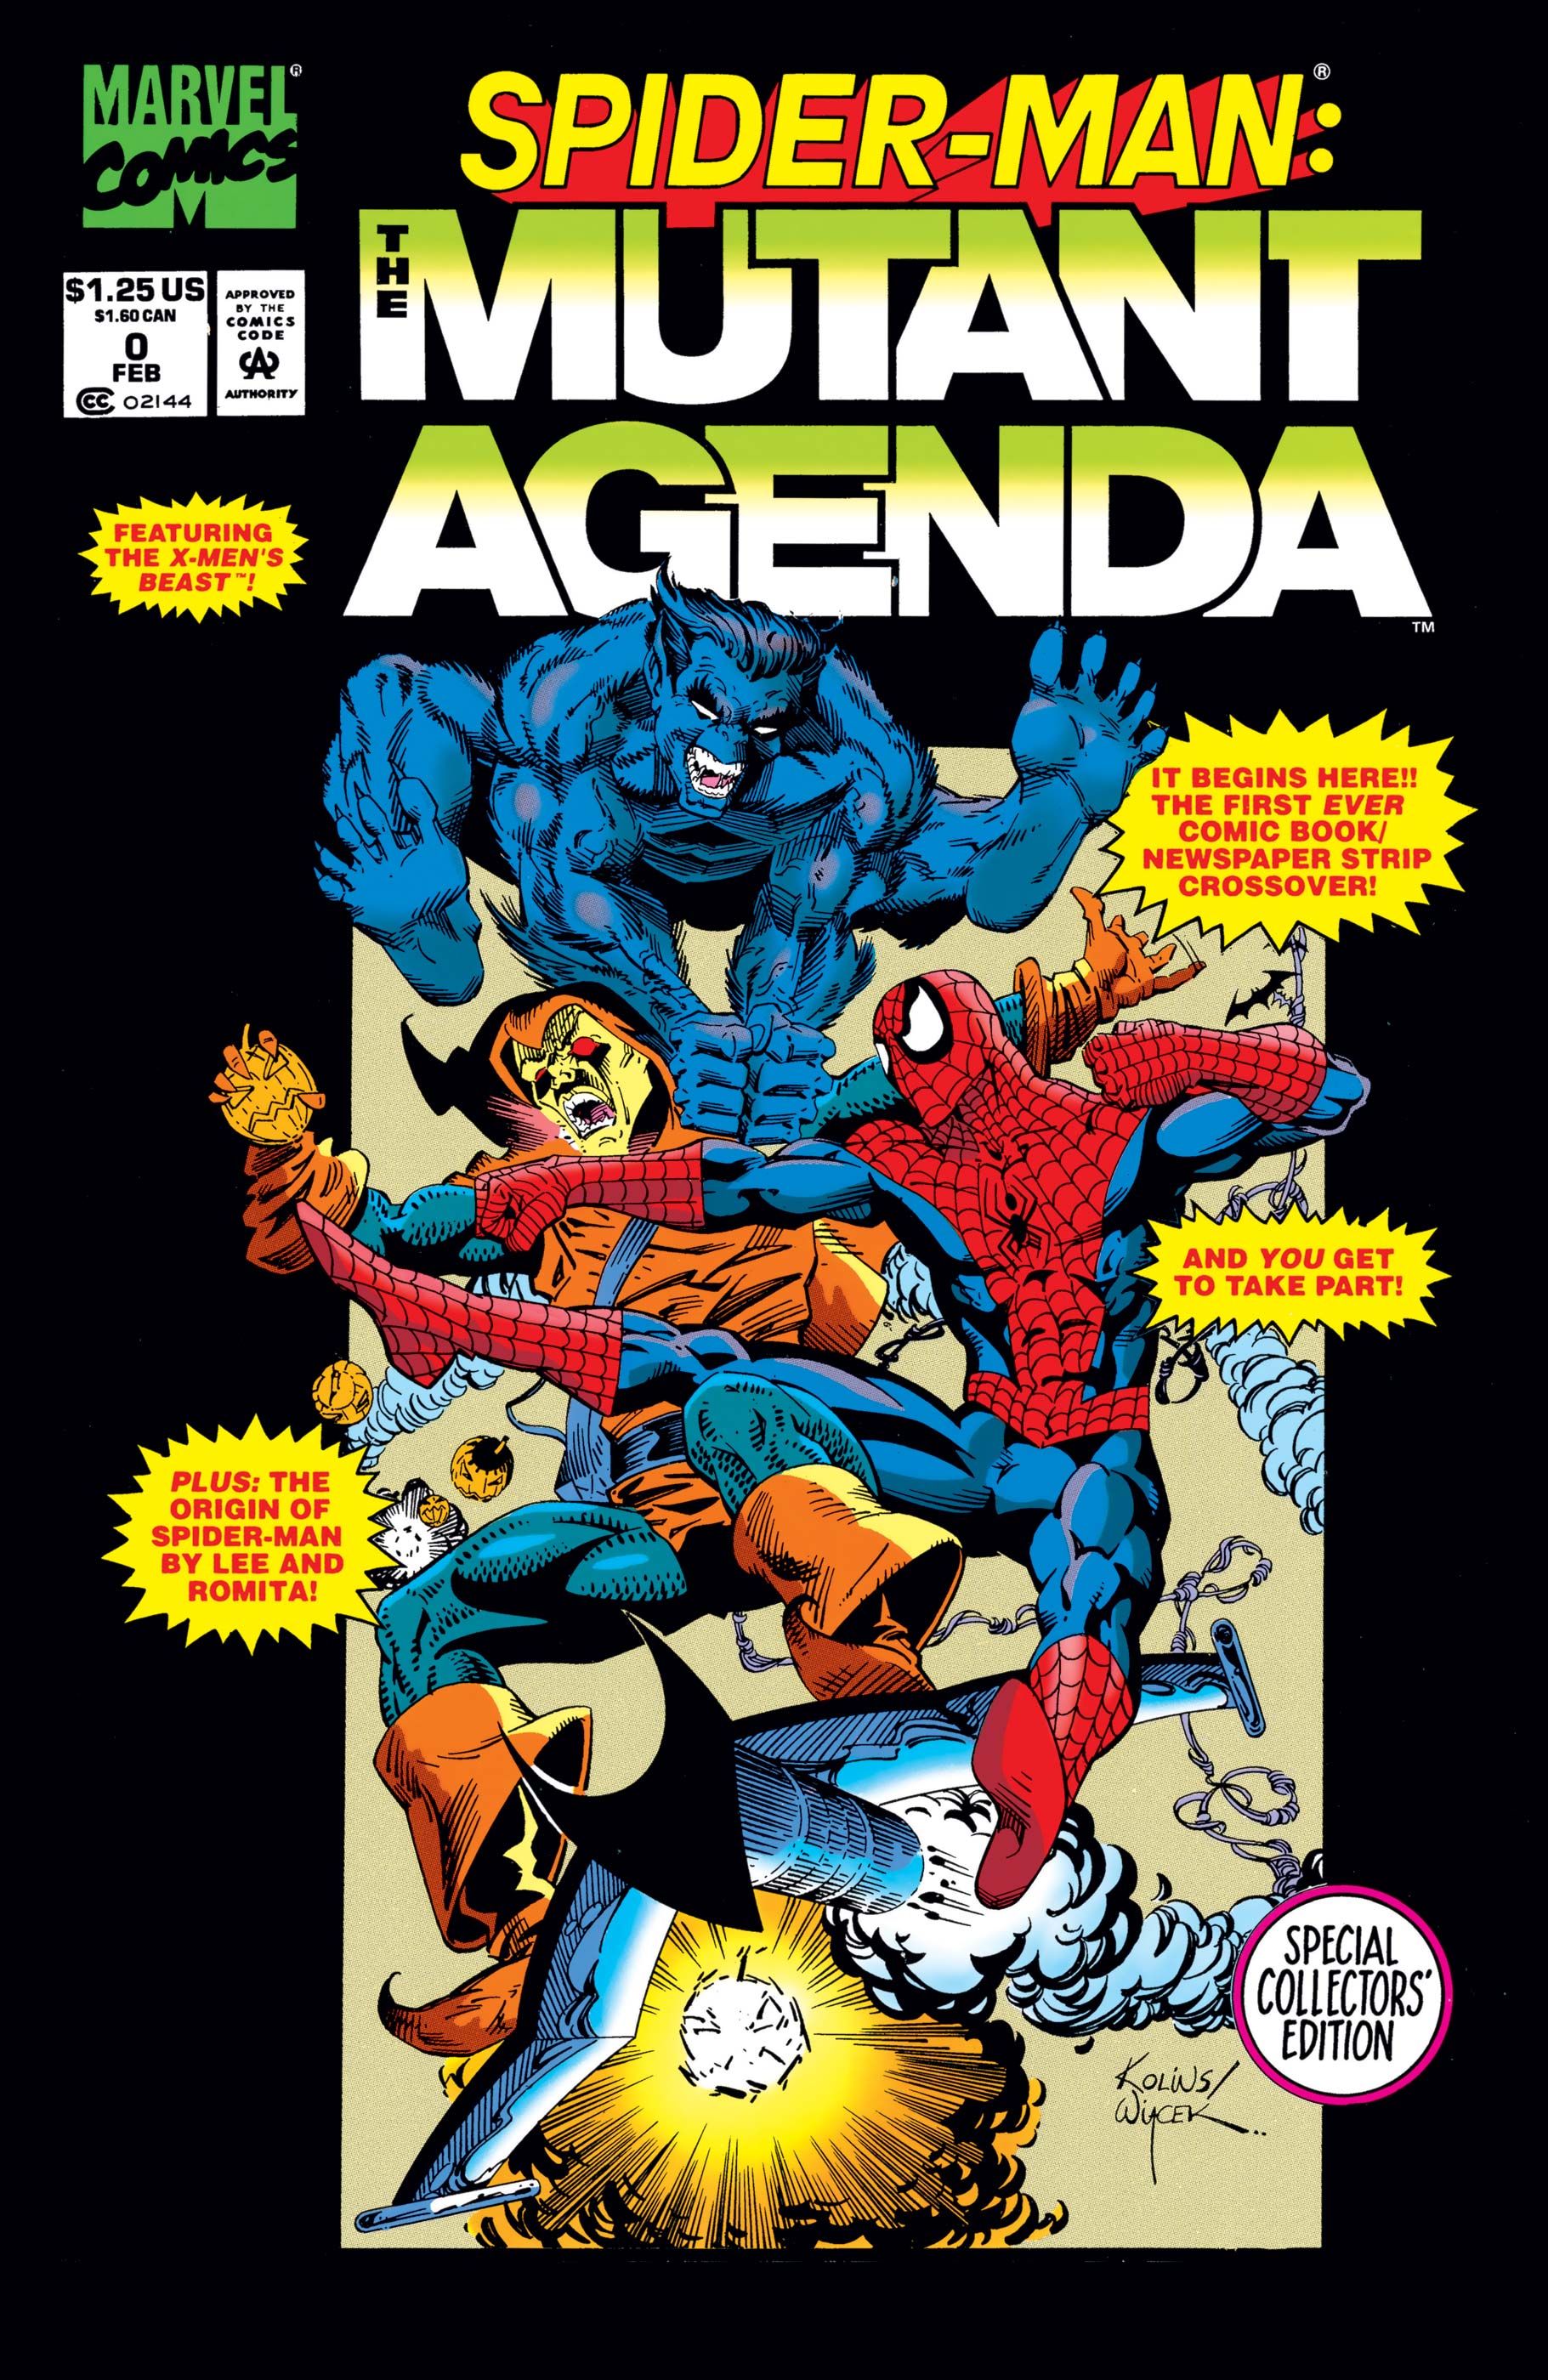 USA, 1994 Spiderman: The Mutant Agenda # 2 of 4 guest: Beast 